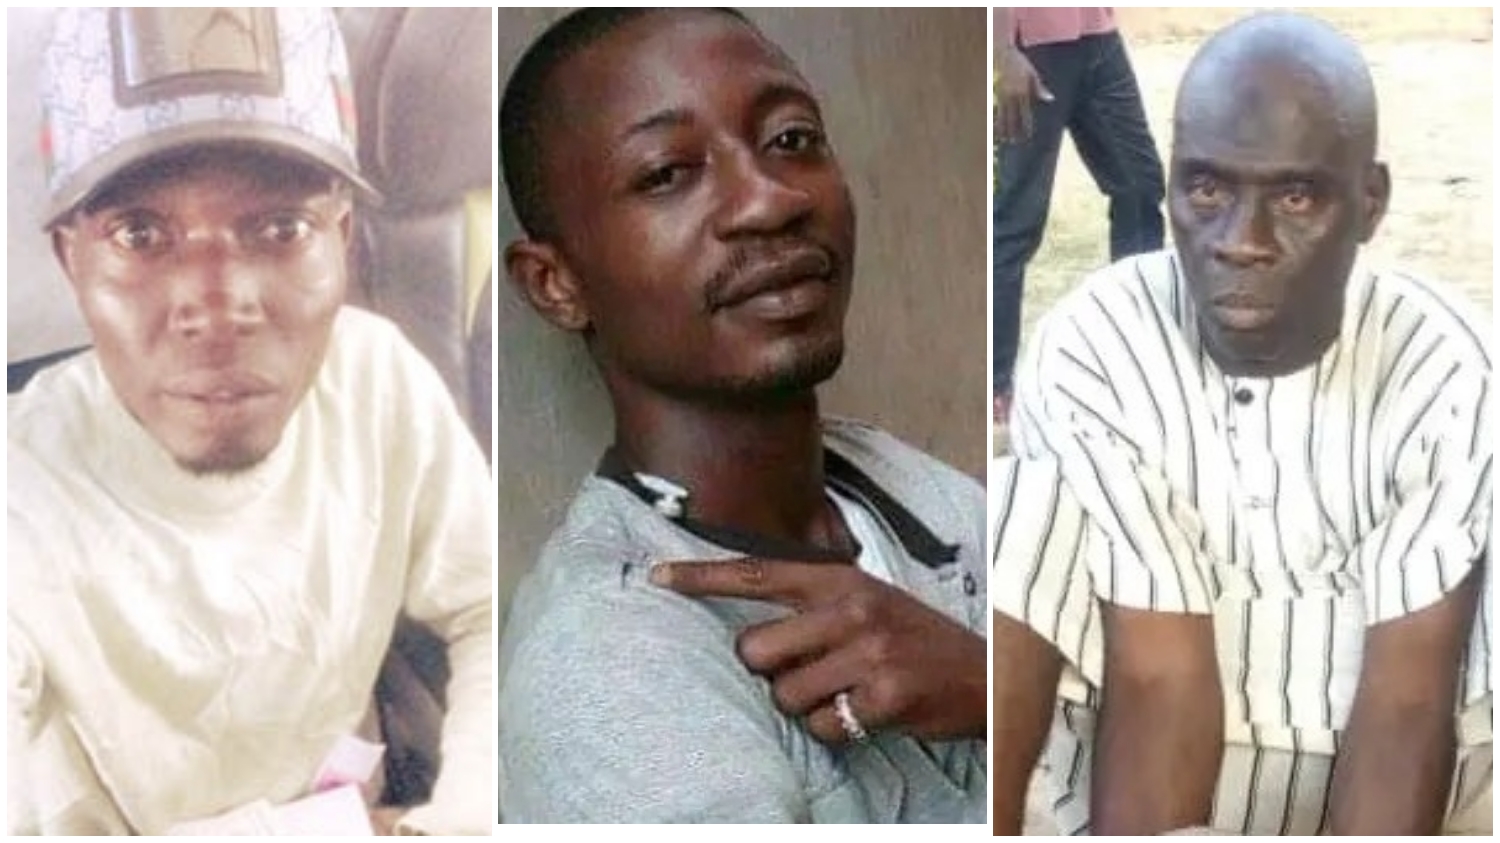 Innocent Nigerians Always 'Act Strangely' Before Dying in Police Detention. But Why?